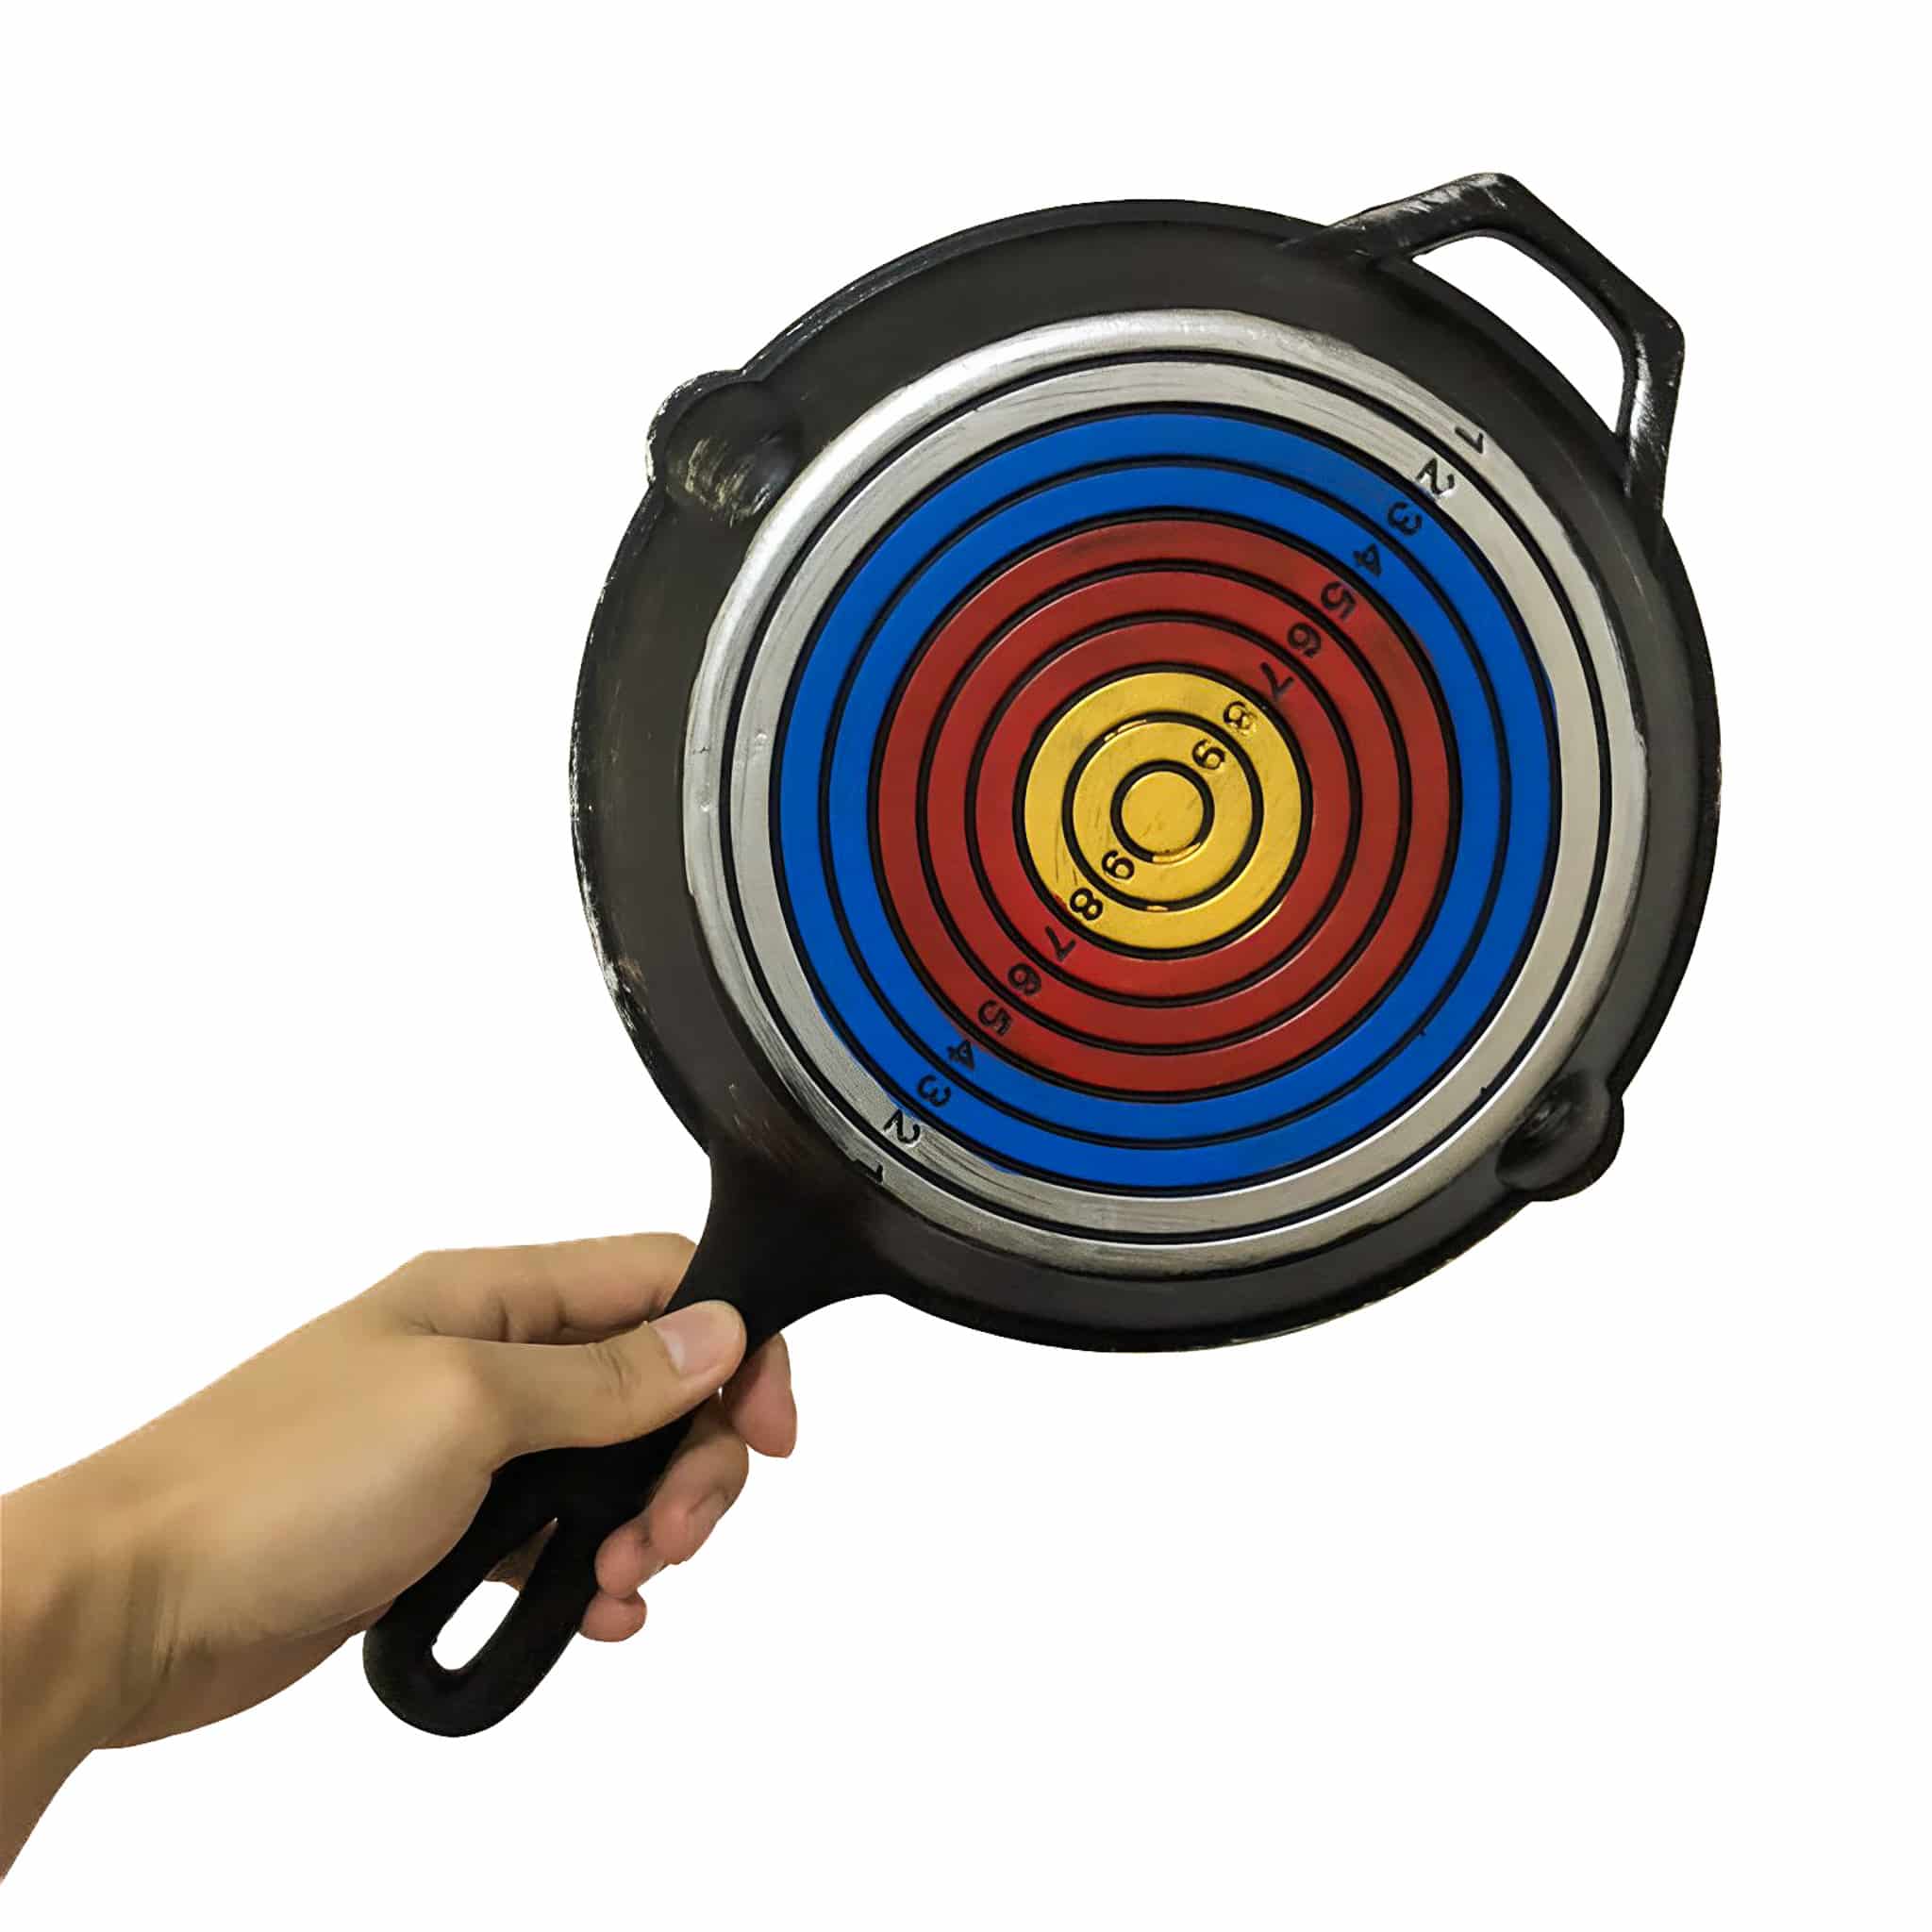 Unique PUBG Pan replica with Target Practice Skin, made from safe PU rubber, perfect for cosplay and gaming memorabilia collections